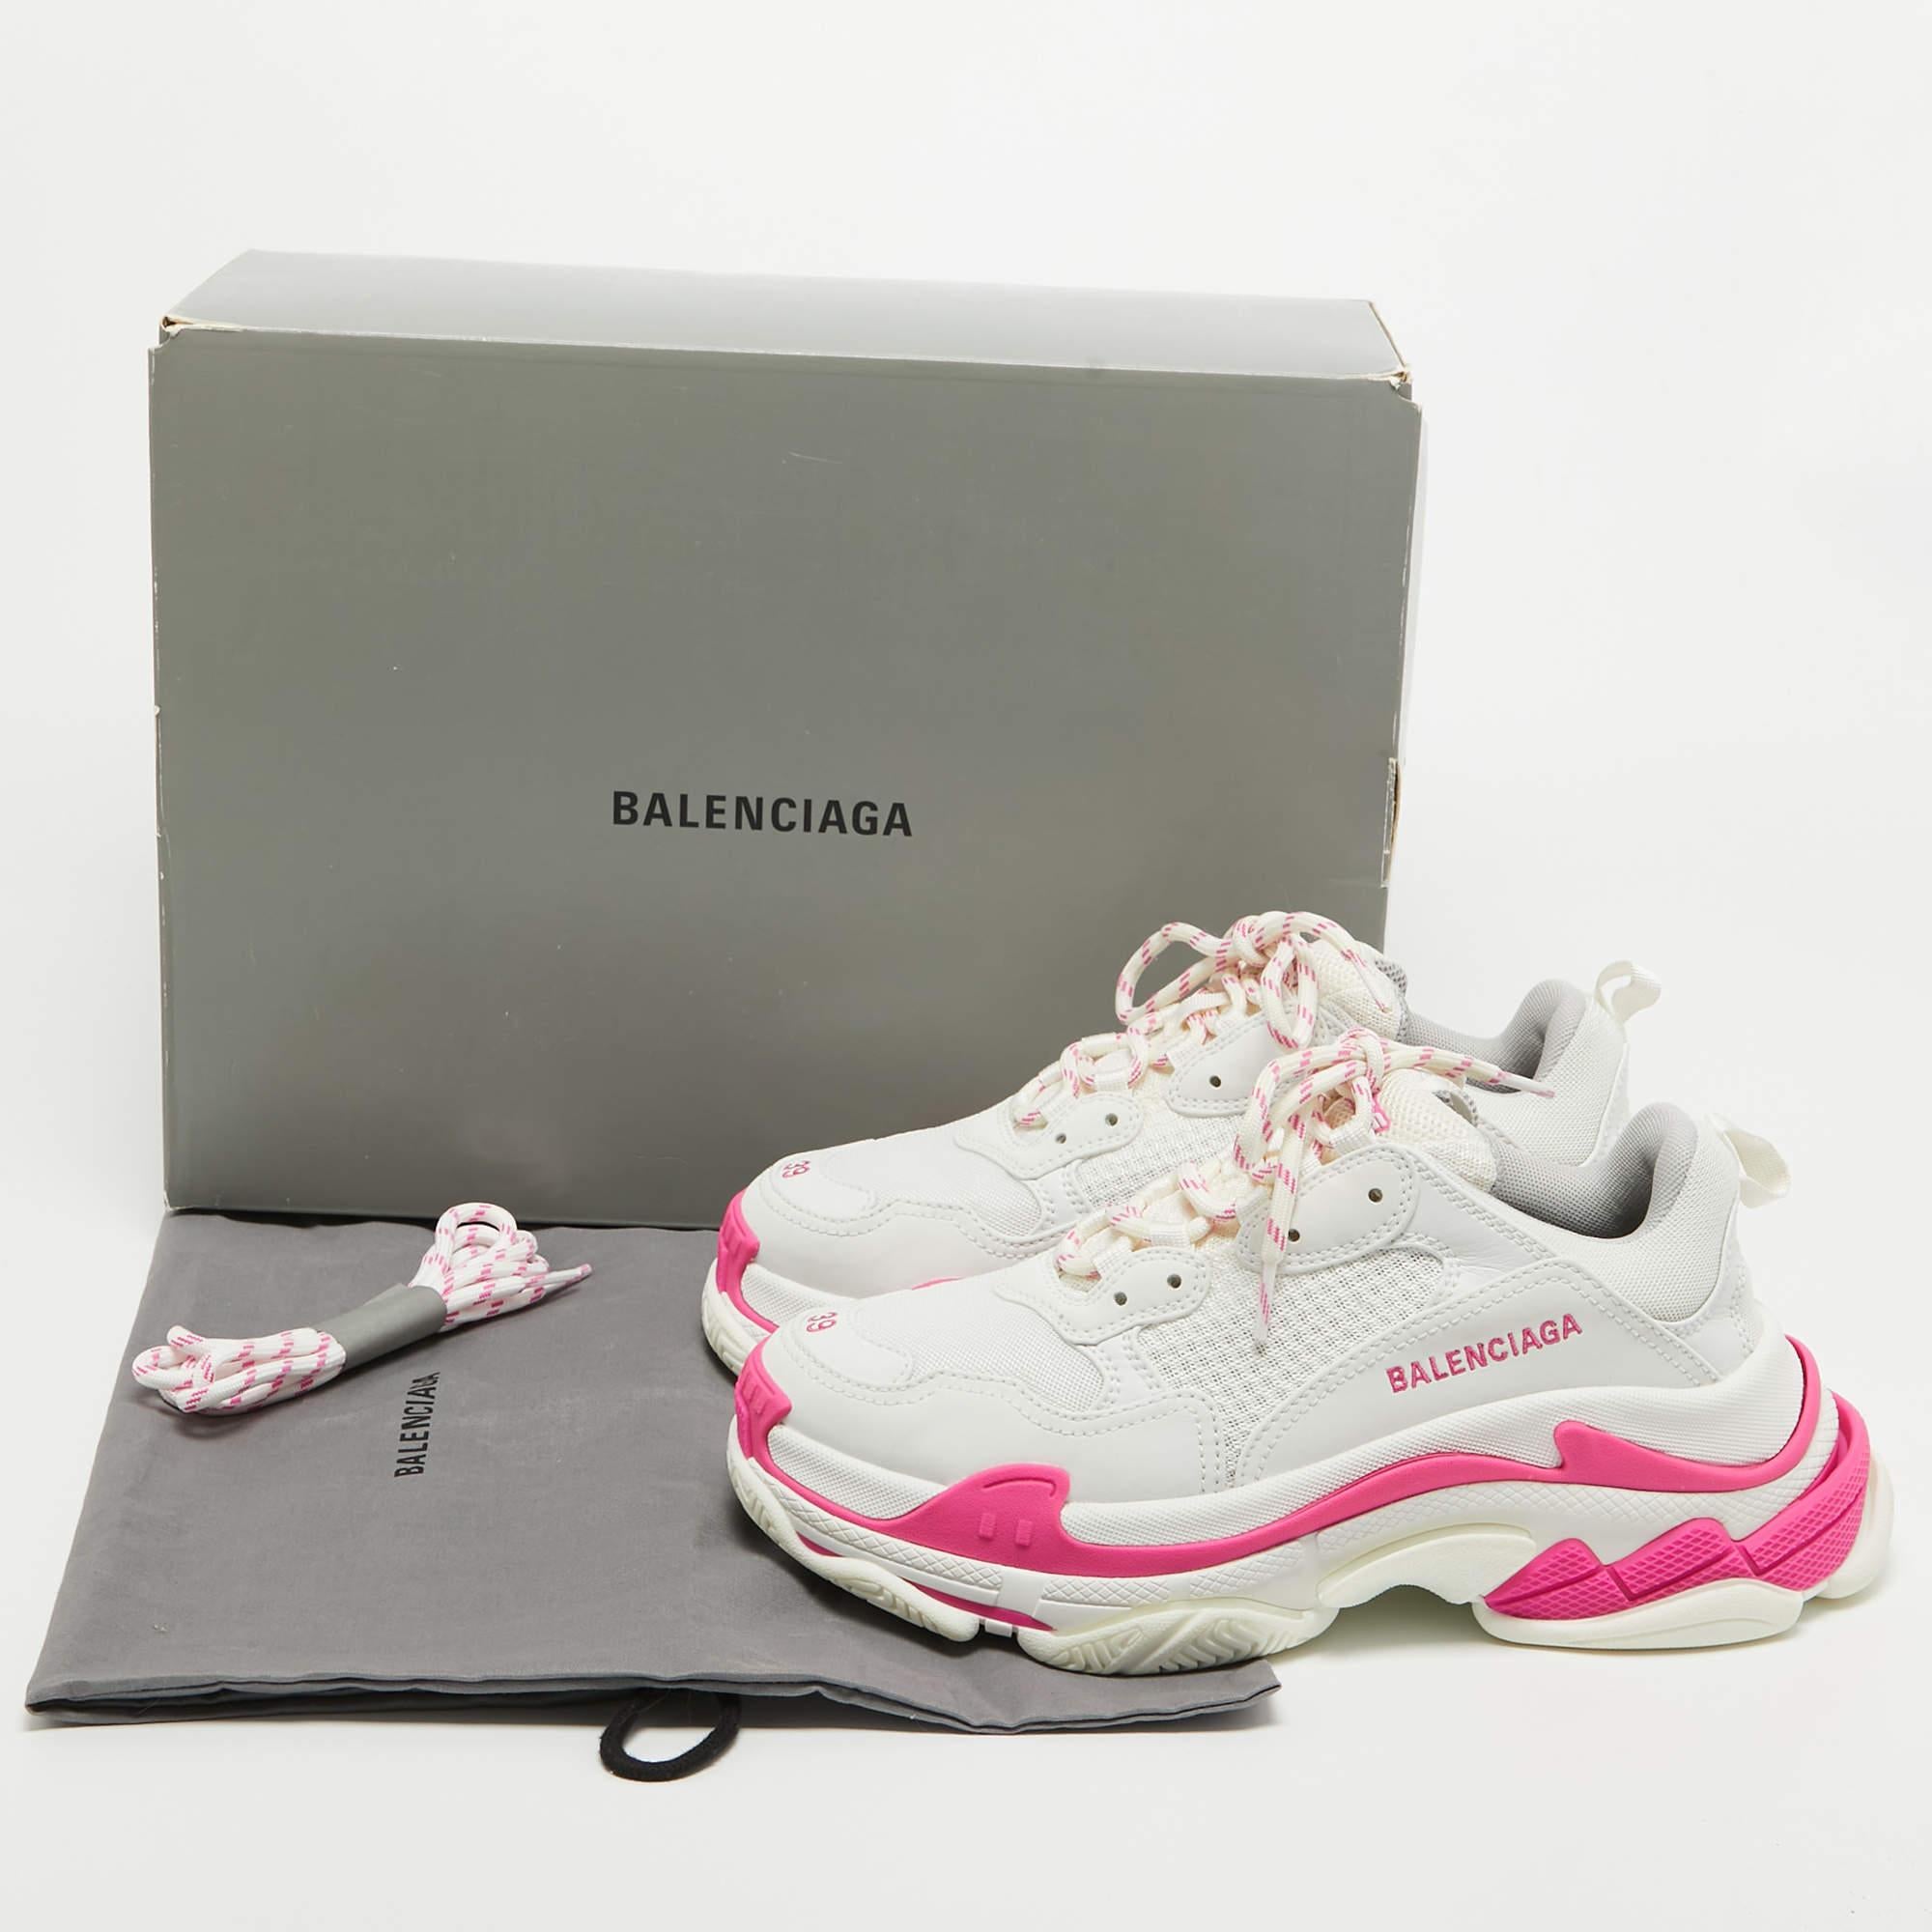 Balenciaga White/Pink Leather and Mesh Triple S Sneakers Size 39 5